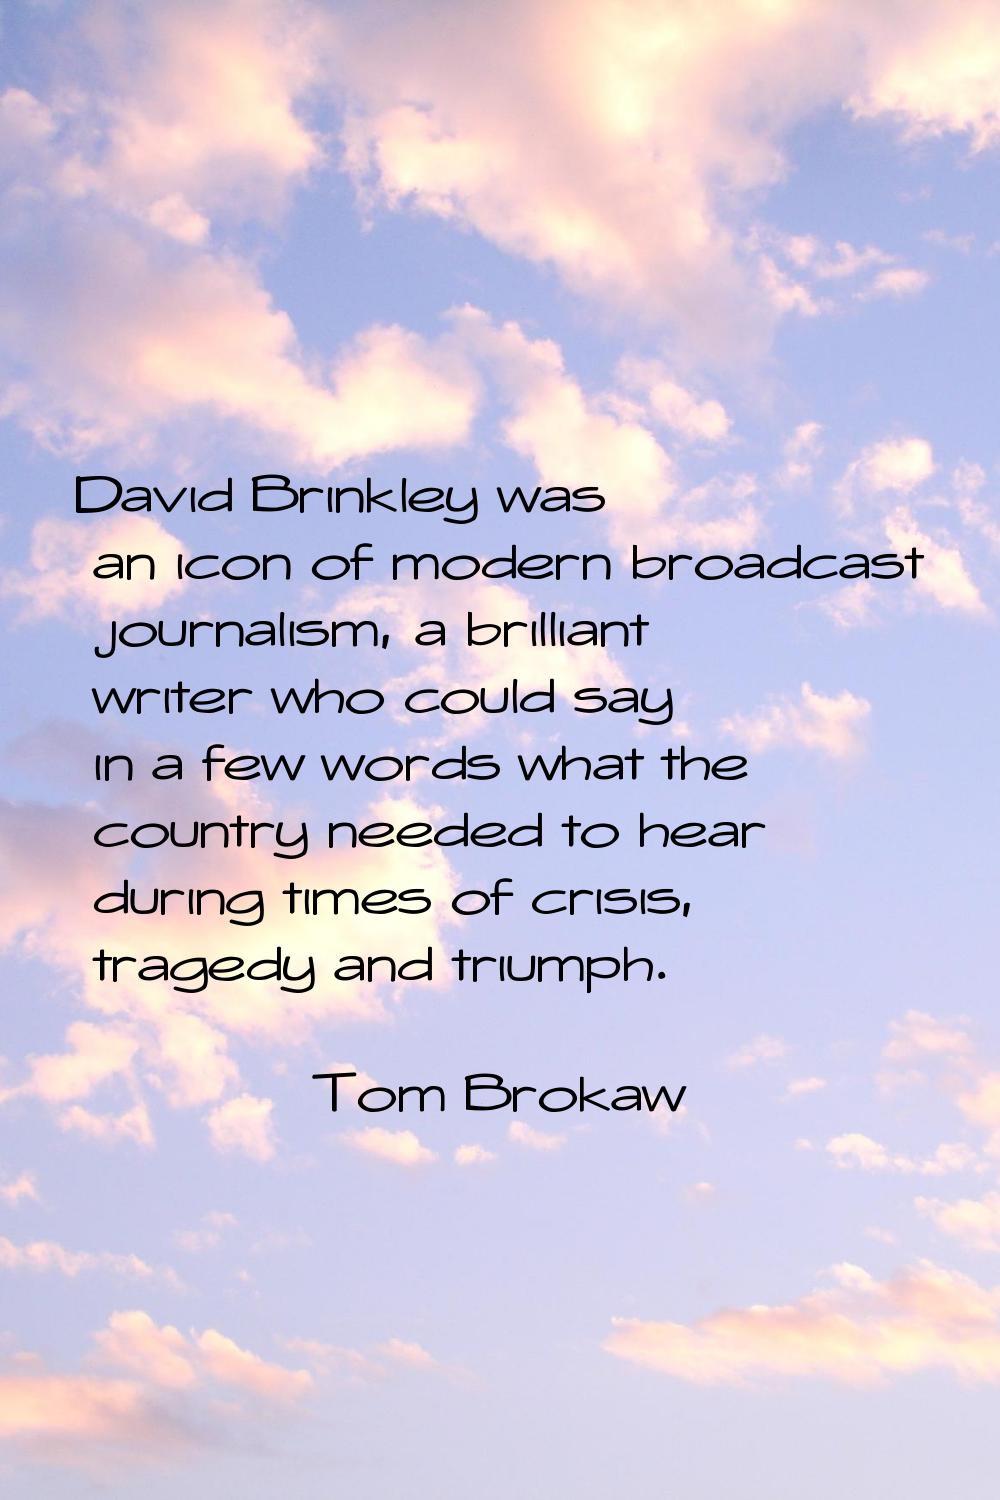 David Brinkley was an icon of modern broadcast journalism, a brilliant writer who could say in a fe